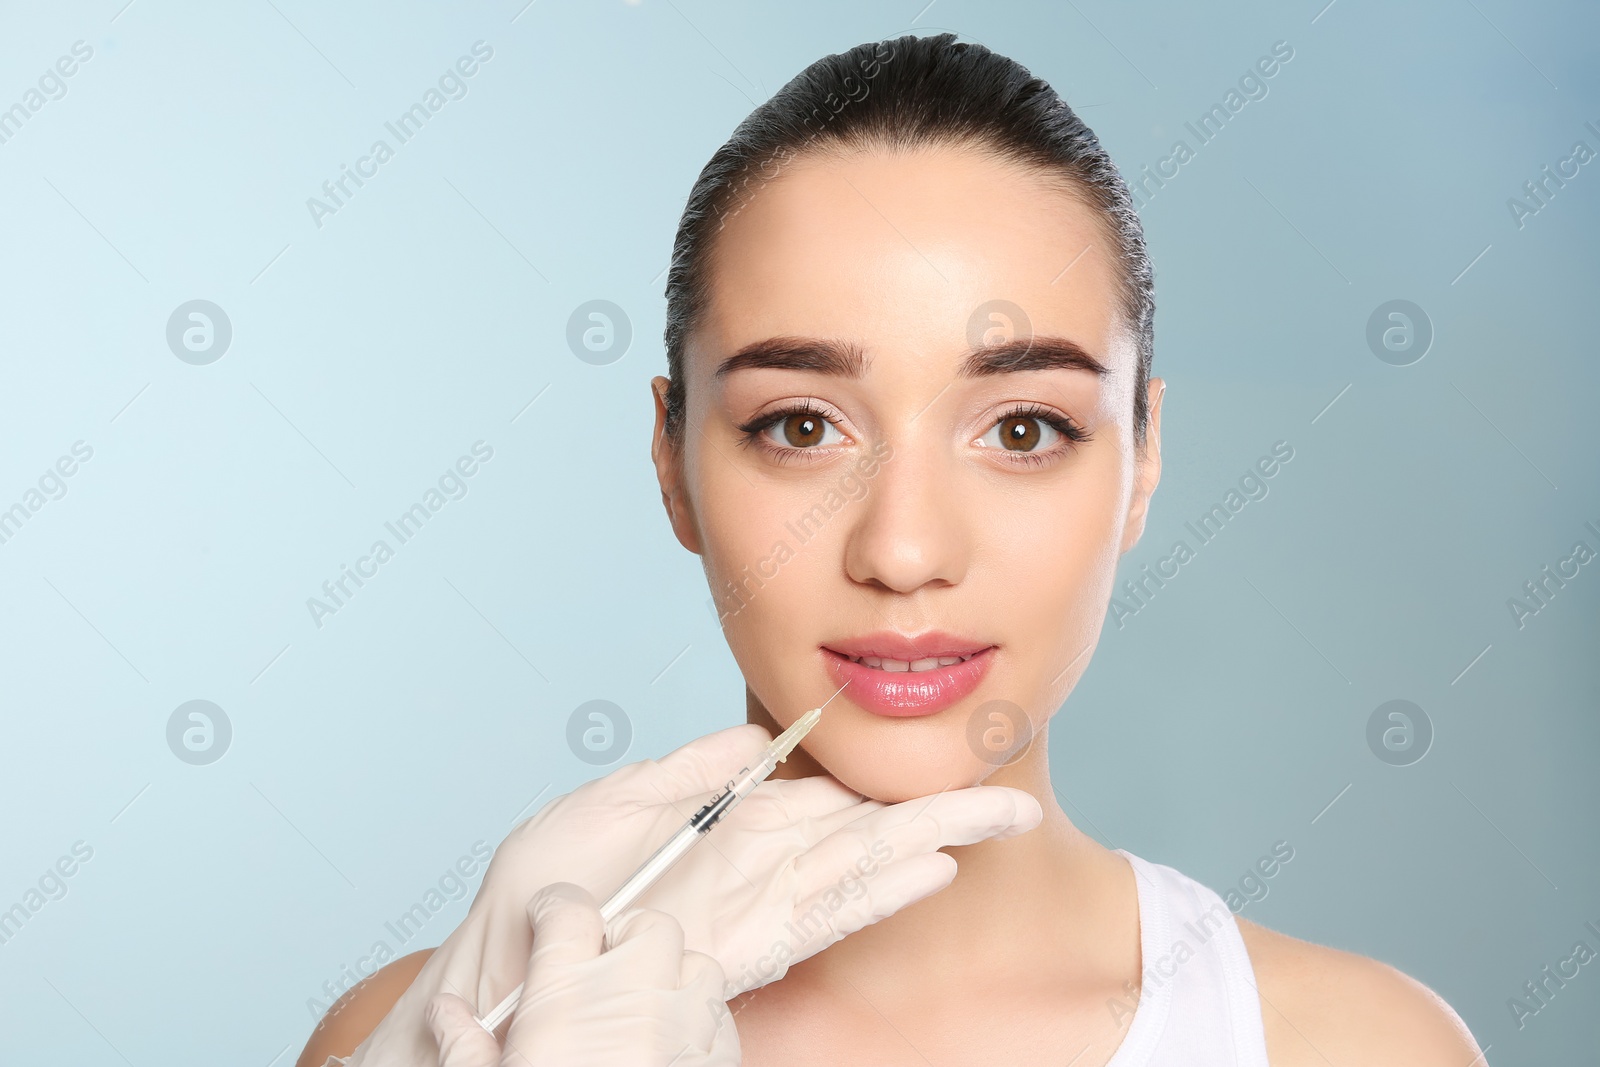 Photo of Young woman getting lip injection on color background